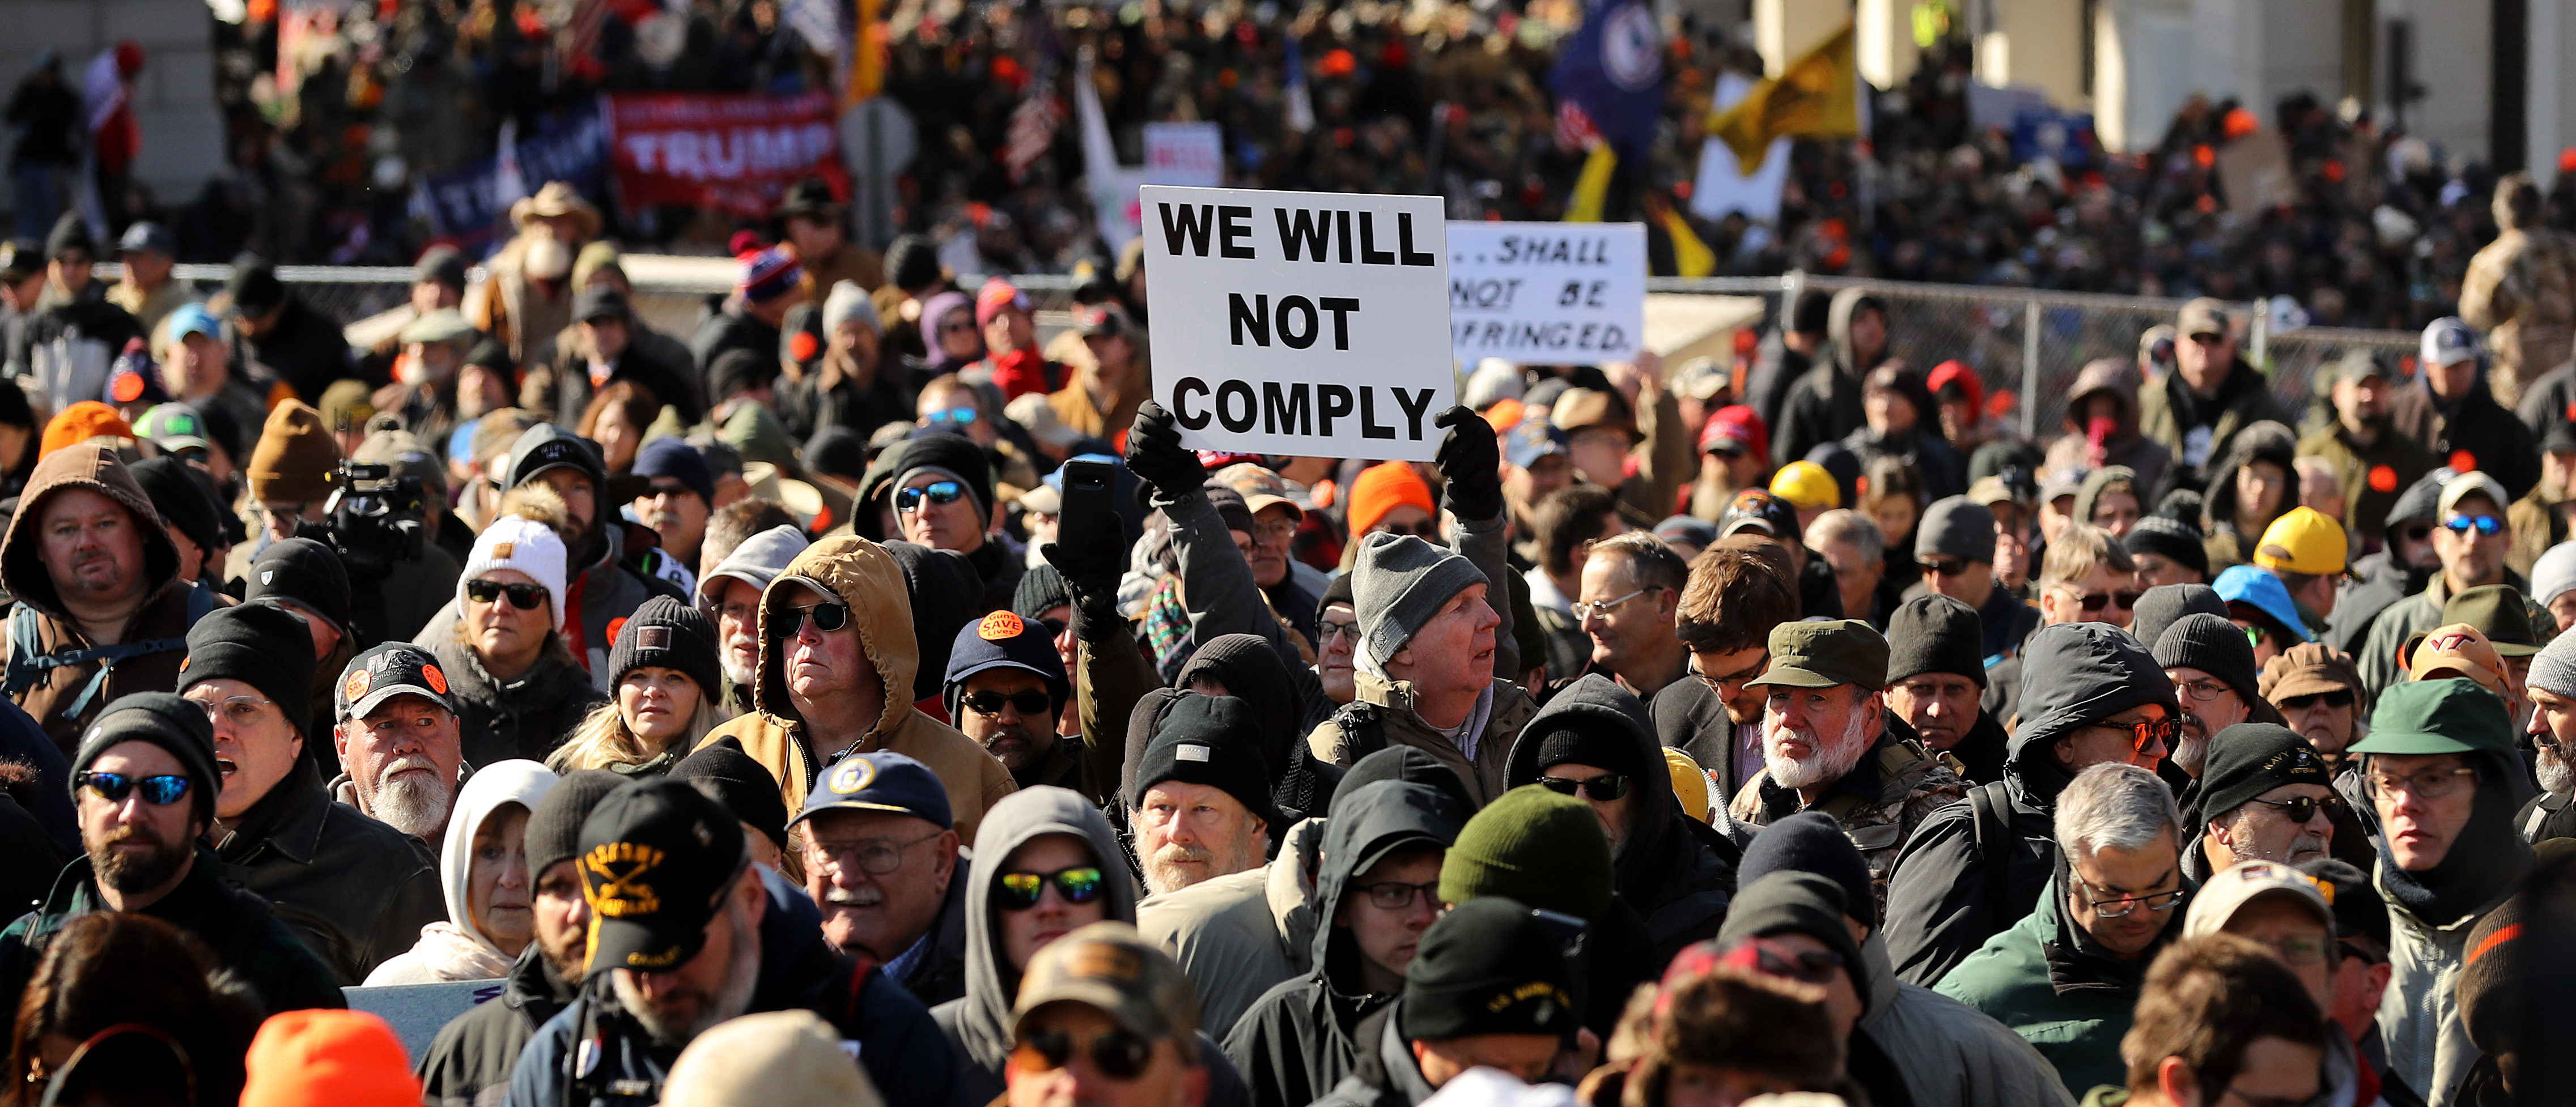 Thousands of gun rights advocates attend a rally organized by The Virginia Citizens Defense League on Capitol Square near the state capital building Jan. 20, 2020 in Richmond, Virginia. (Photo by Chip Somodevilla/Getty Images)